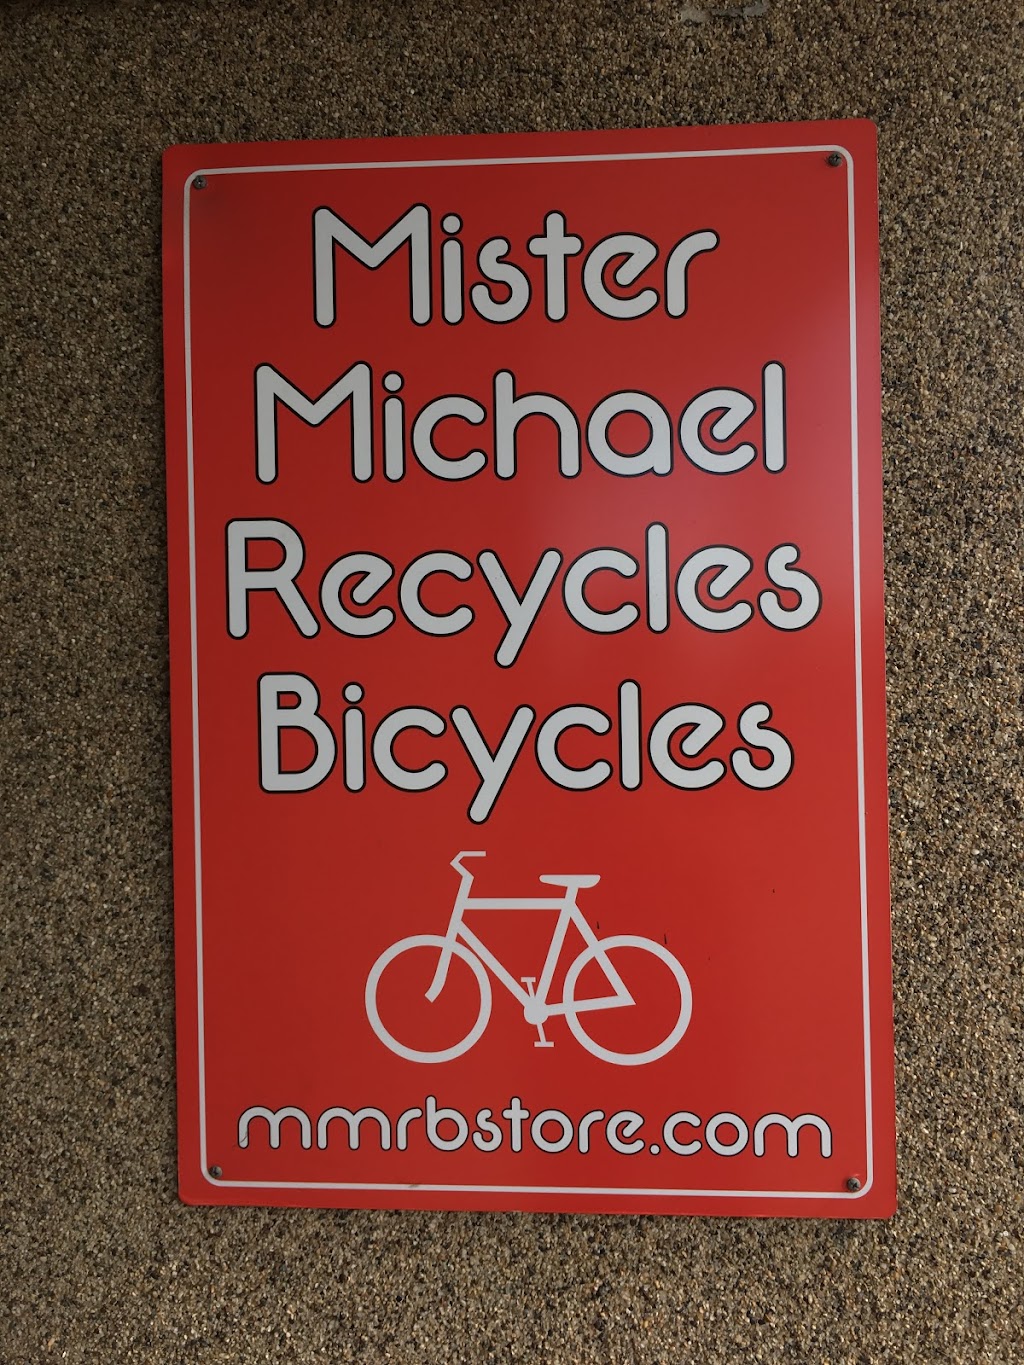 Mr. Michael Recycles Bicycles | 520 Prior Ave N, St Paul, MN 55104 | Phone: (651) 641-1037